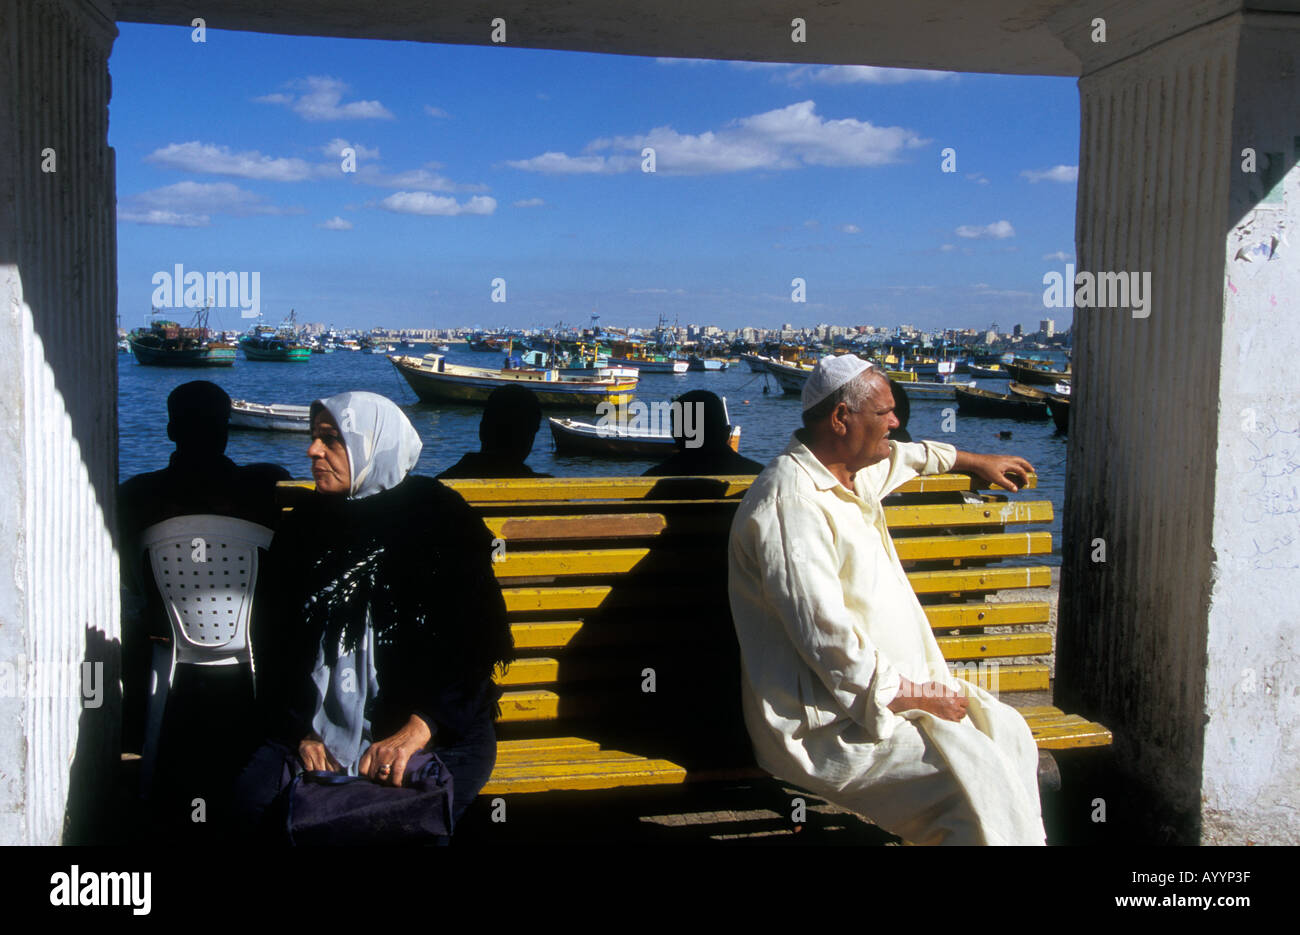 Waiting at a bus stop along the Corniche, Alexandria, Egypt. Stock Photo